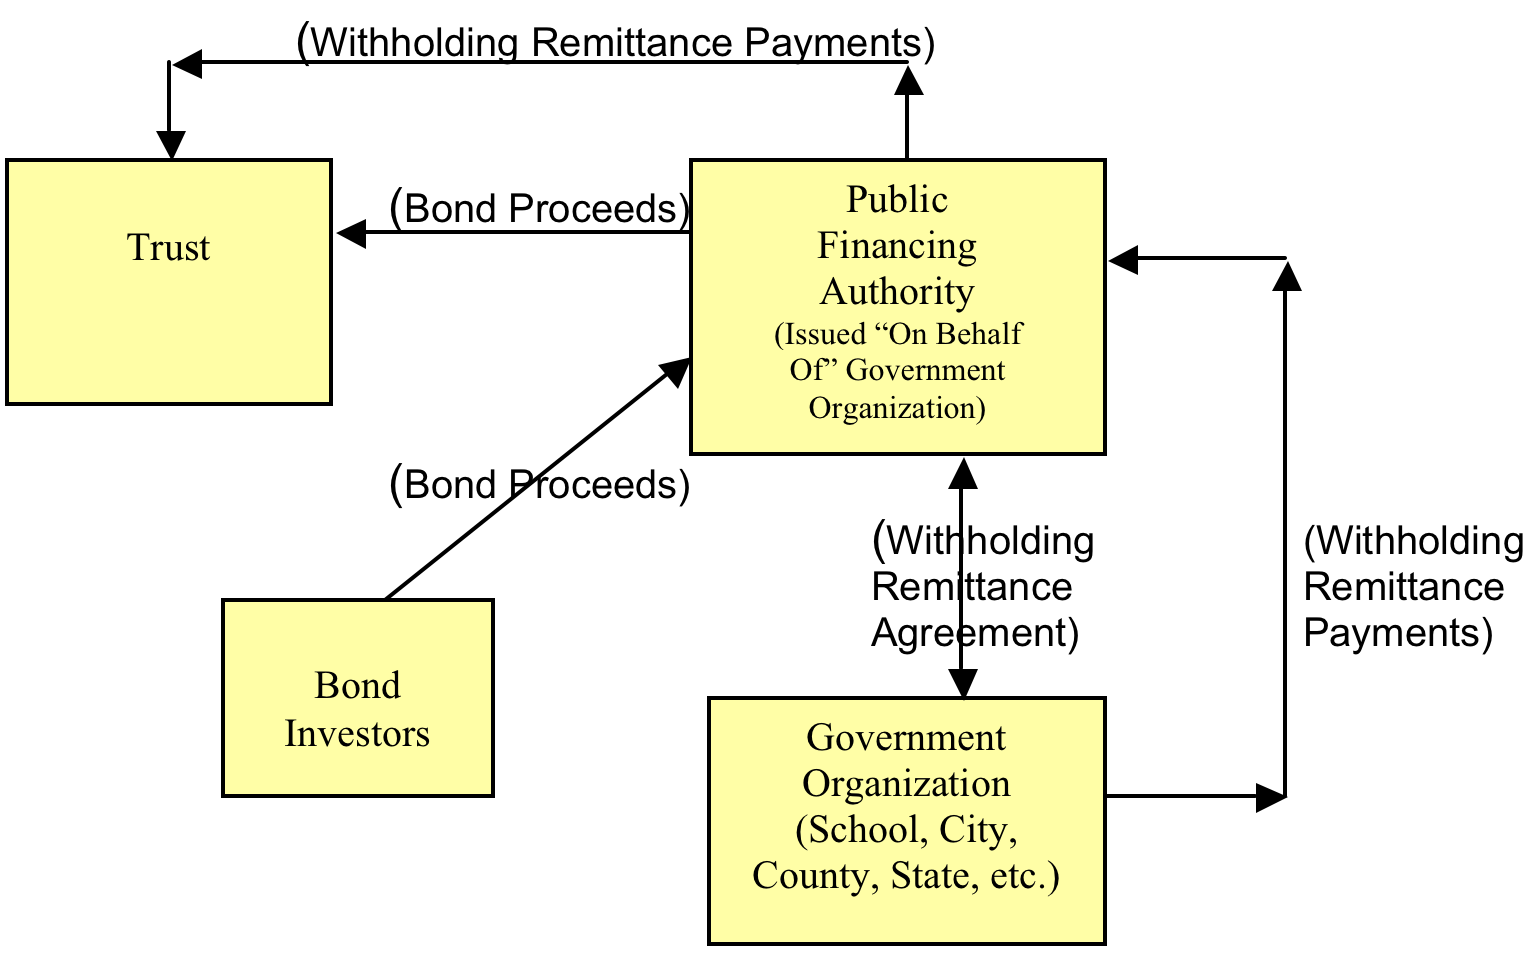 Implementation of Advanced Funding Model by Government Organizations